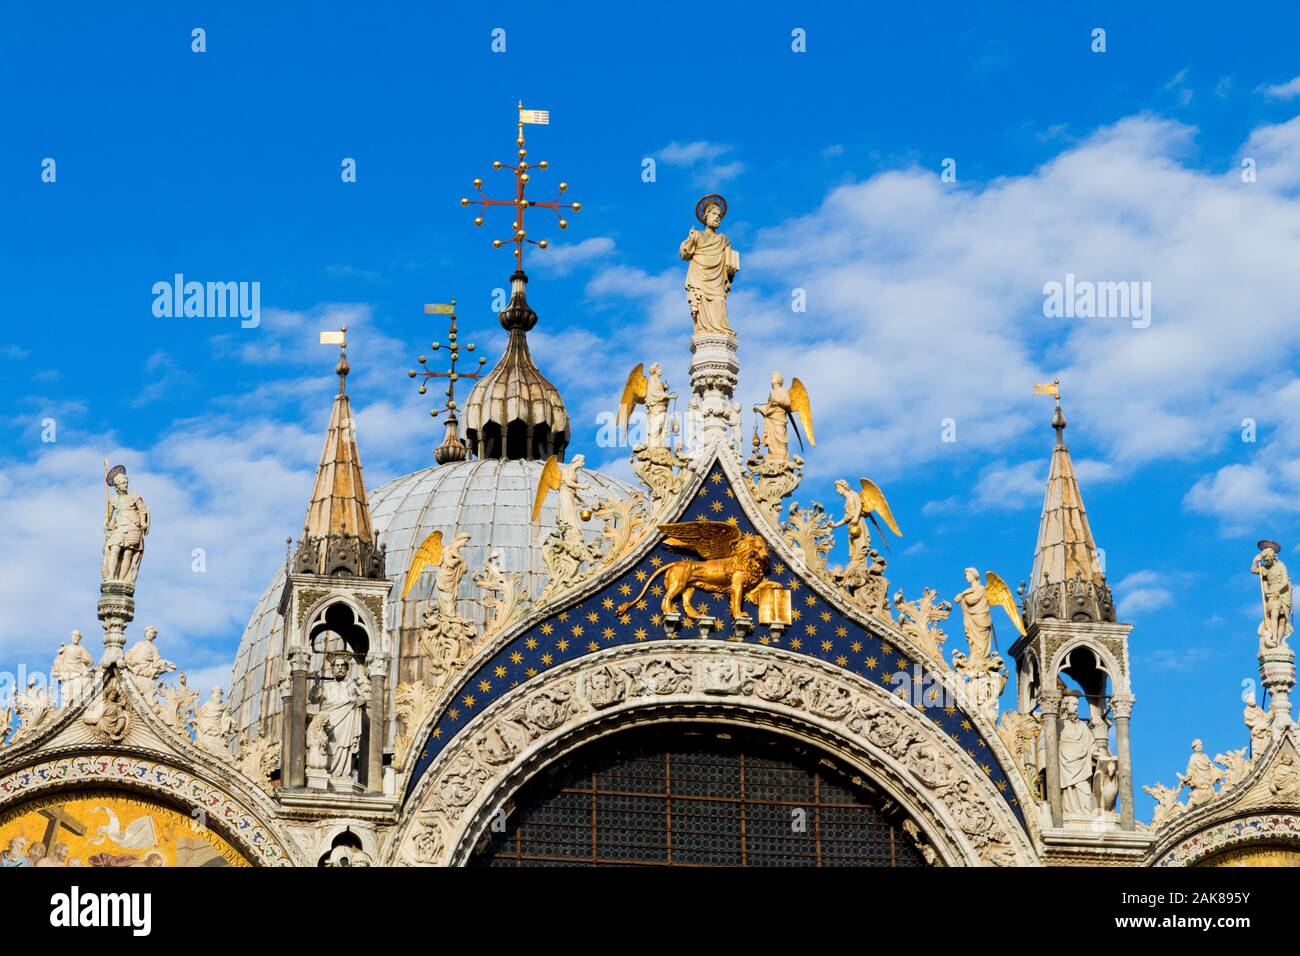 The facade of St Marks Basilica featuring Christ and angels along with the Lion of St Mark in Venice Italy Stock Photo